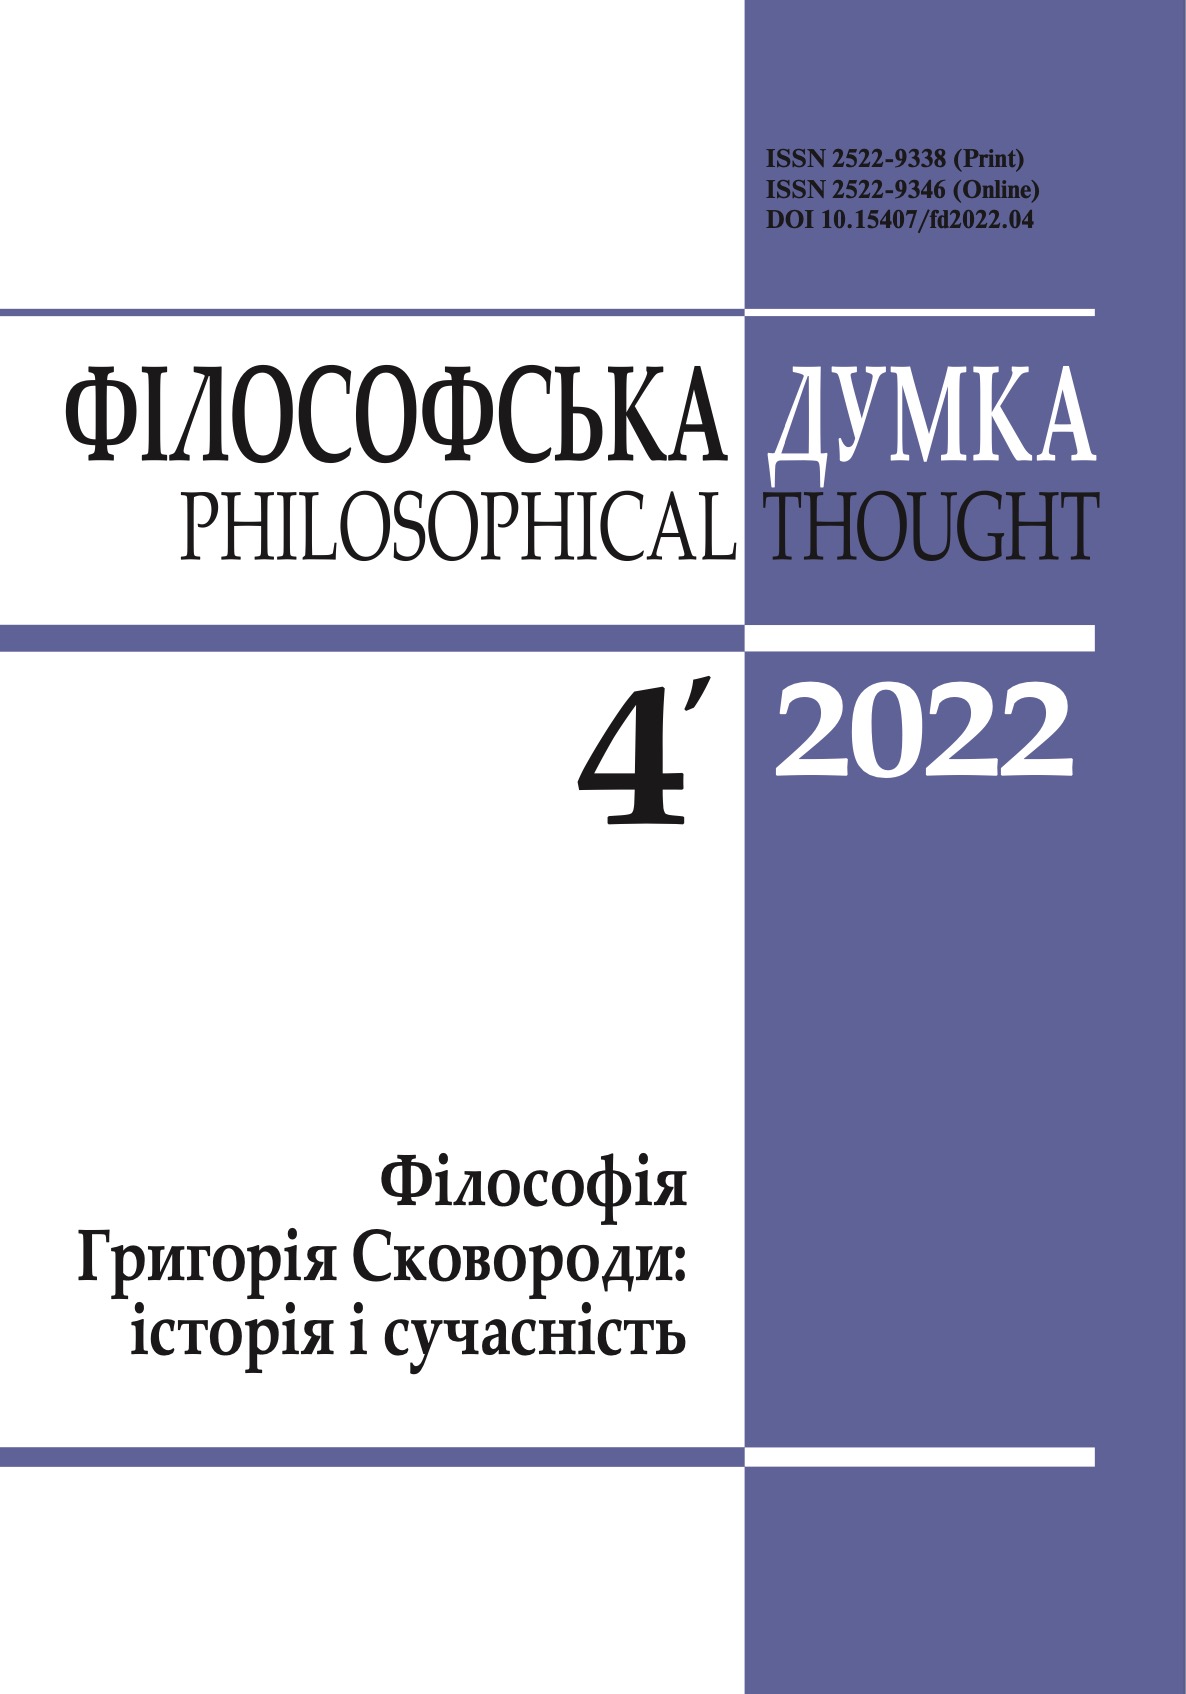 					View No. 4 (2022): Philosophical thought
				